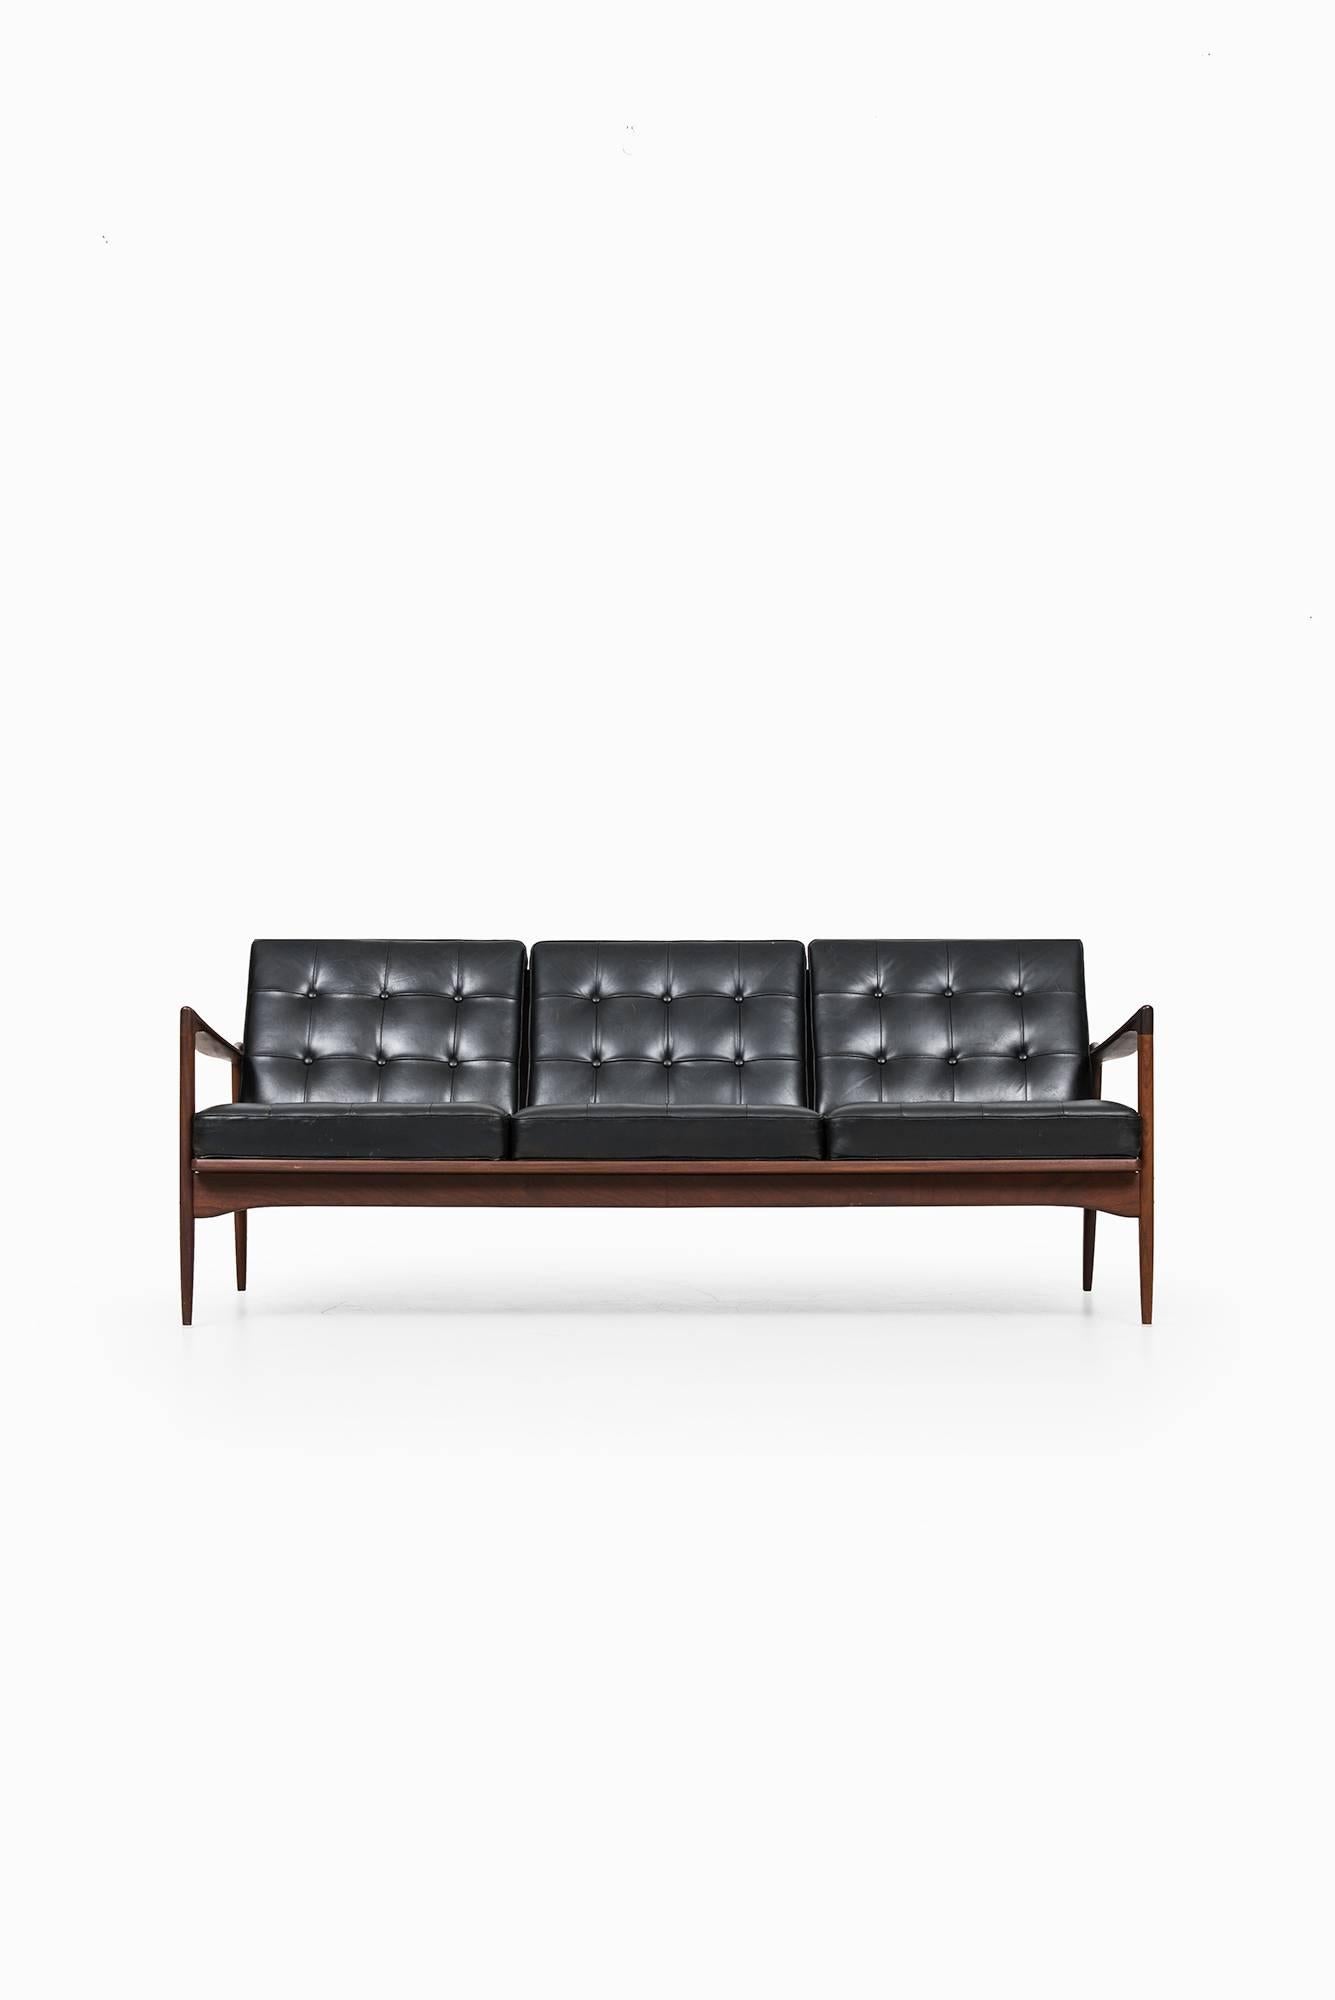 Rare sofa model Kandidaten designed by Ib Kofod-Larsen. Produced by OPE in Sweden.